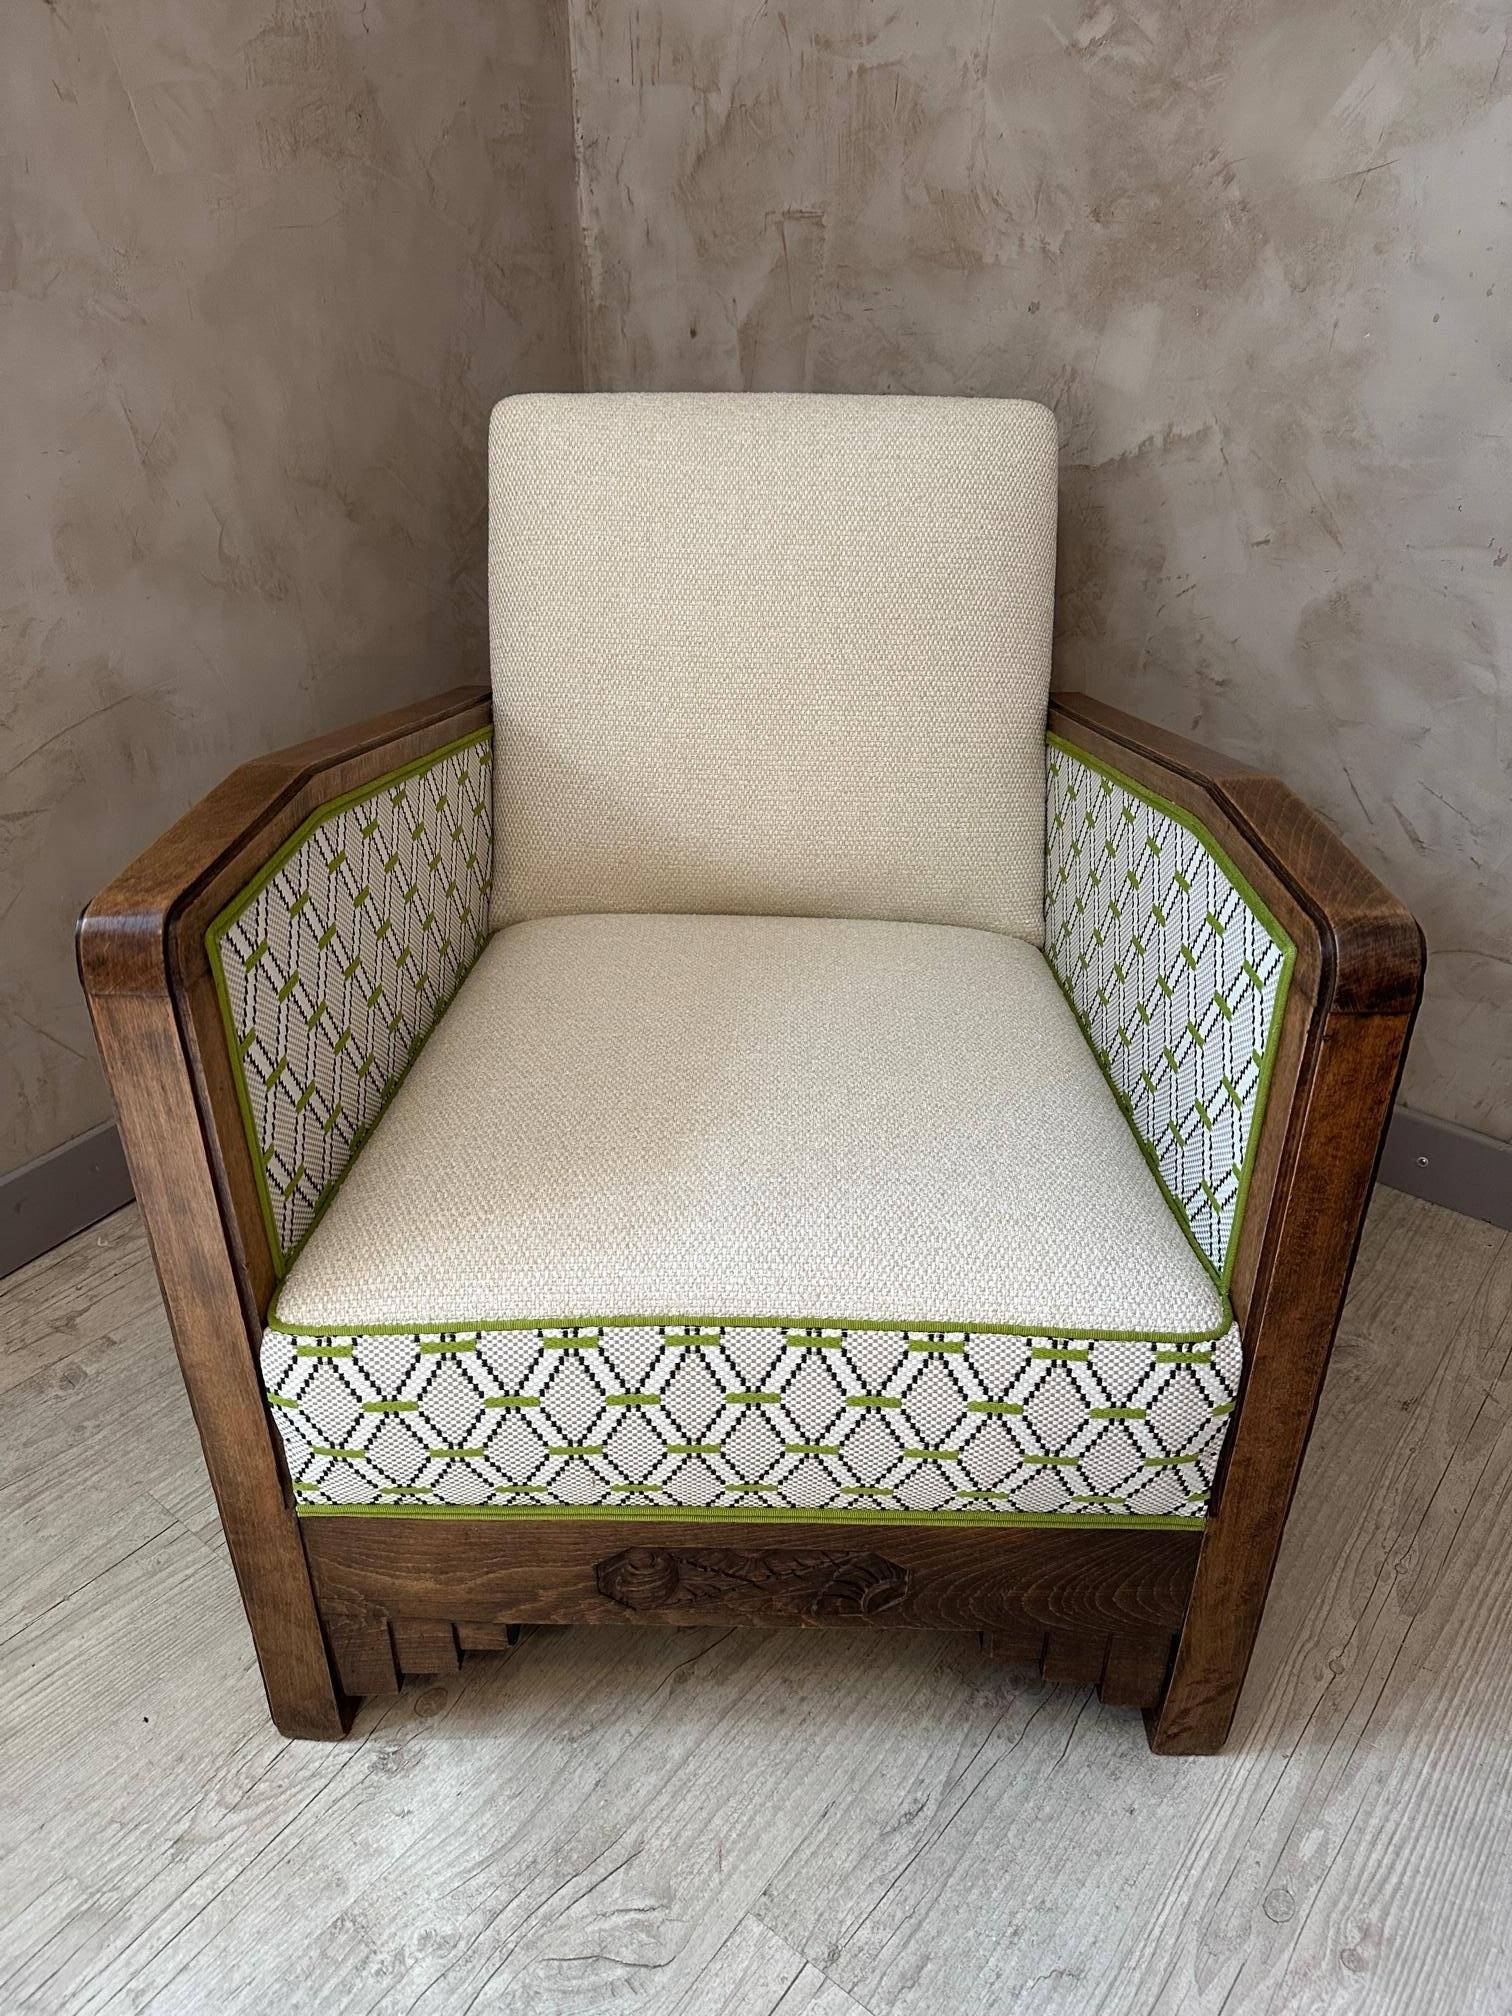 Art Deco French Art deco Reupholstered Armchair with Outdoor Fabric, 1930s For Sale